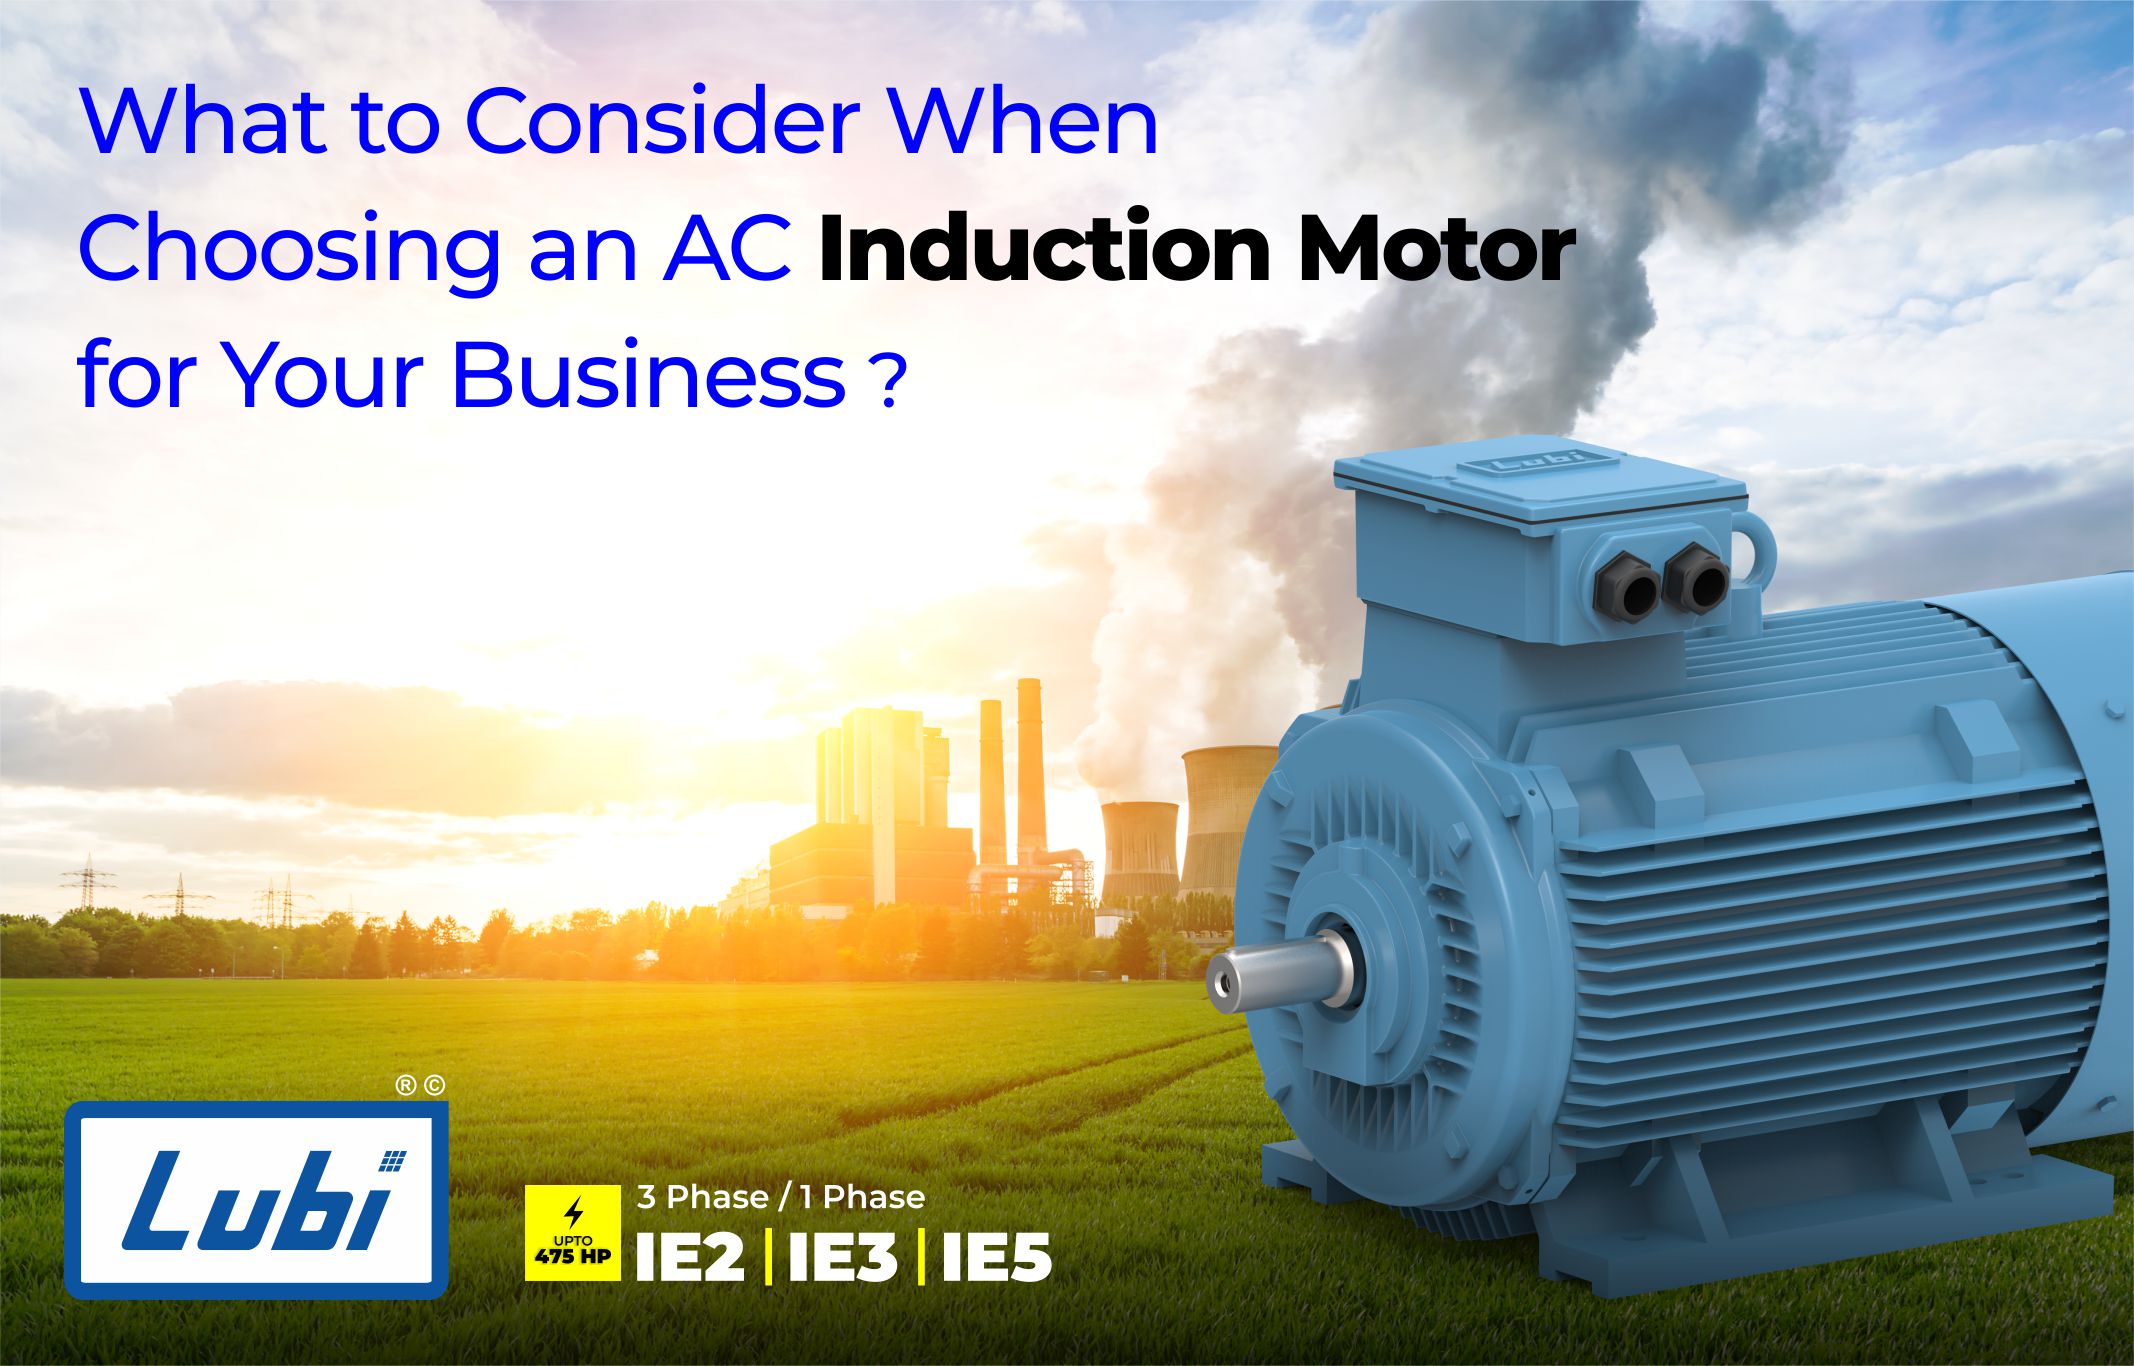 What to Consider When Choosing an AC Induction Motor for Your Business?